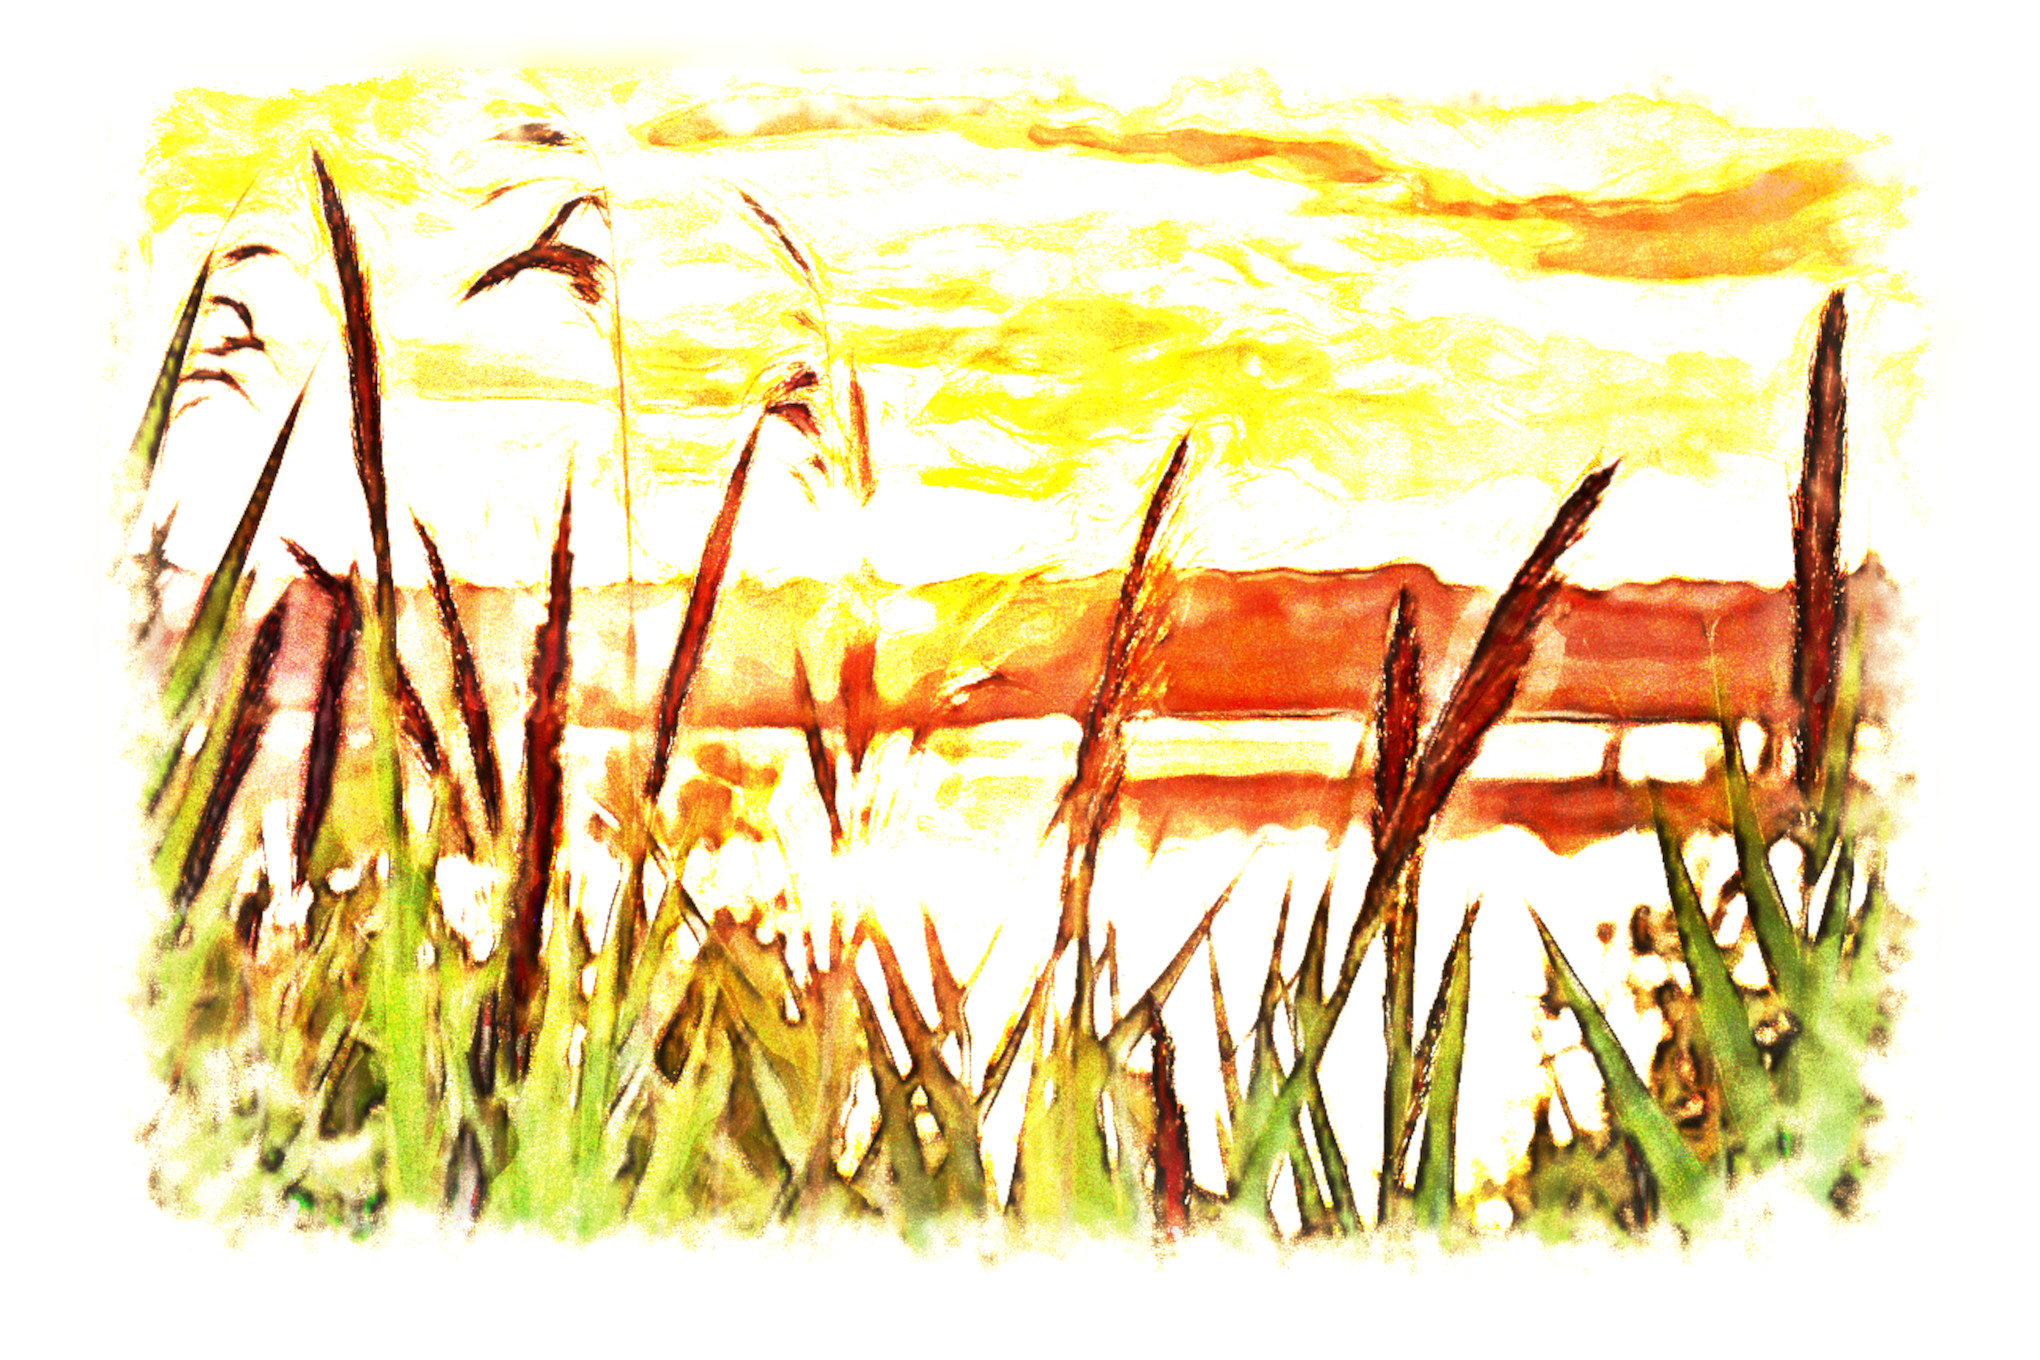 2023-09-30 12-51-58 sunrise-1670979 with a Watercolor Pastels Effect 2023 (4.0,75.0,35.0,40.0,15.0,8.0,75.0,True,1).jpg